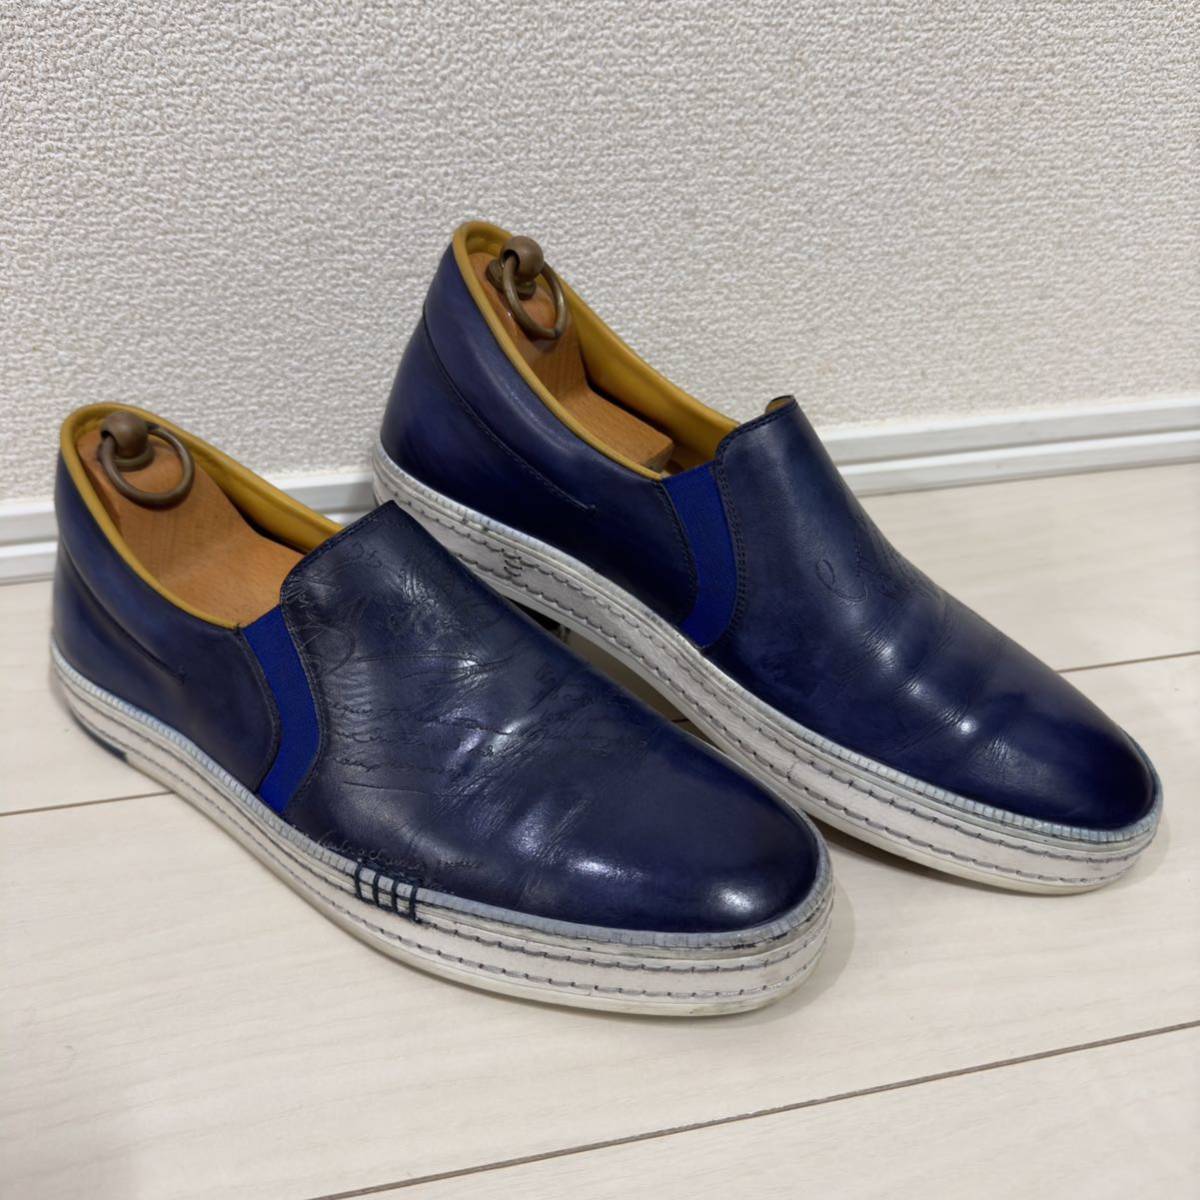  initial model regular price 23.5 ten thousand jpy Berluti Play time kali graph .-sklito leather slip-on shoes sneakers 8.5 blue pa tea n Loafer 